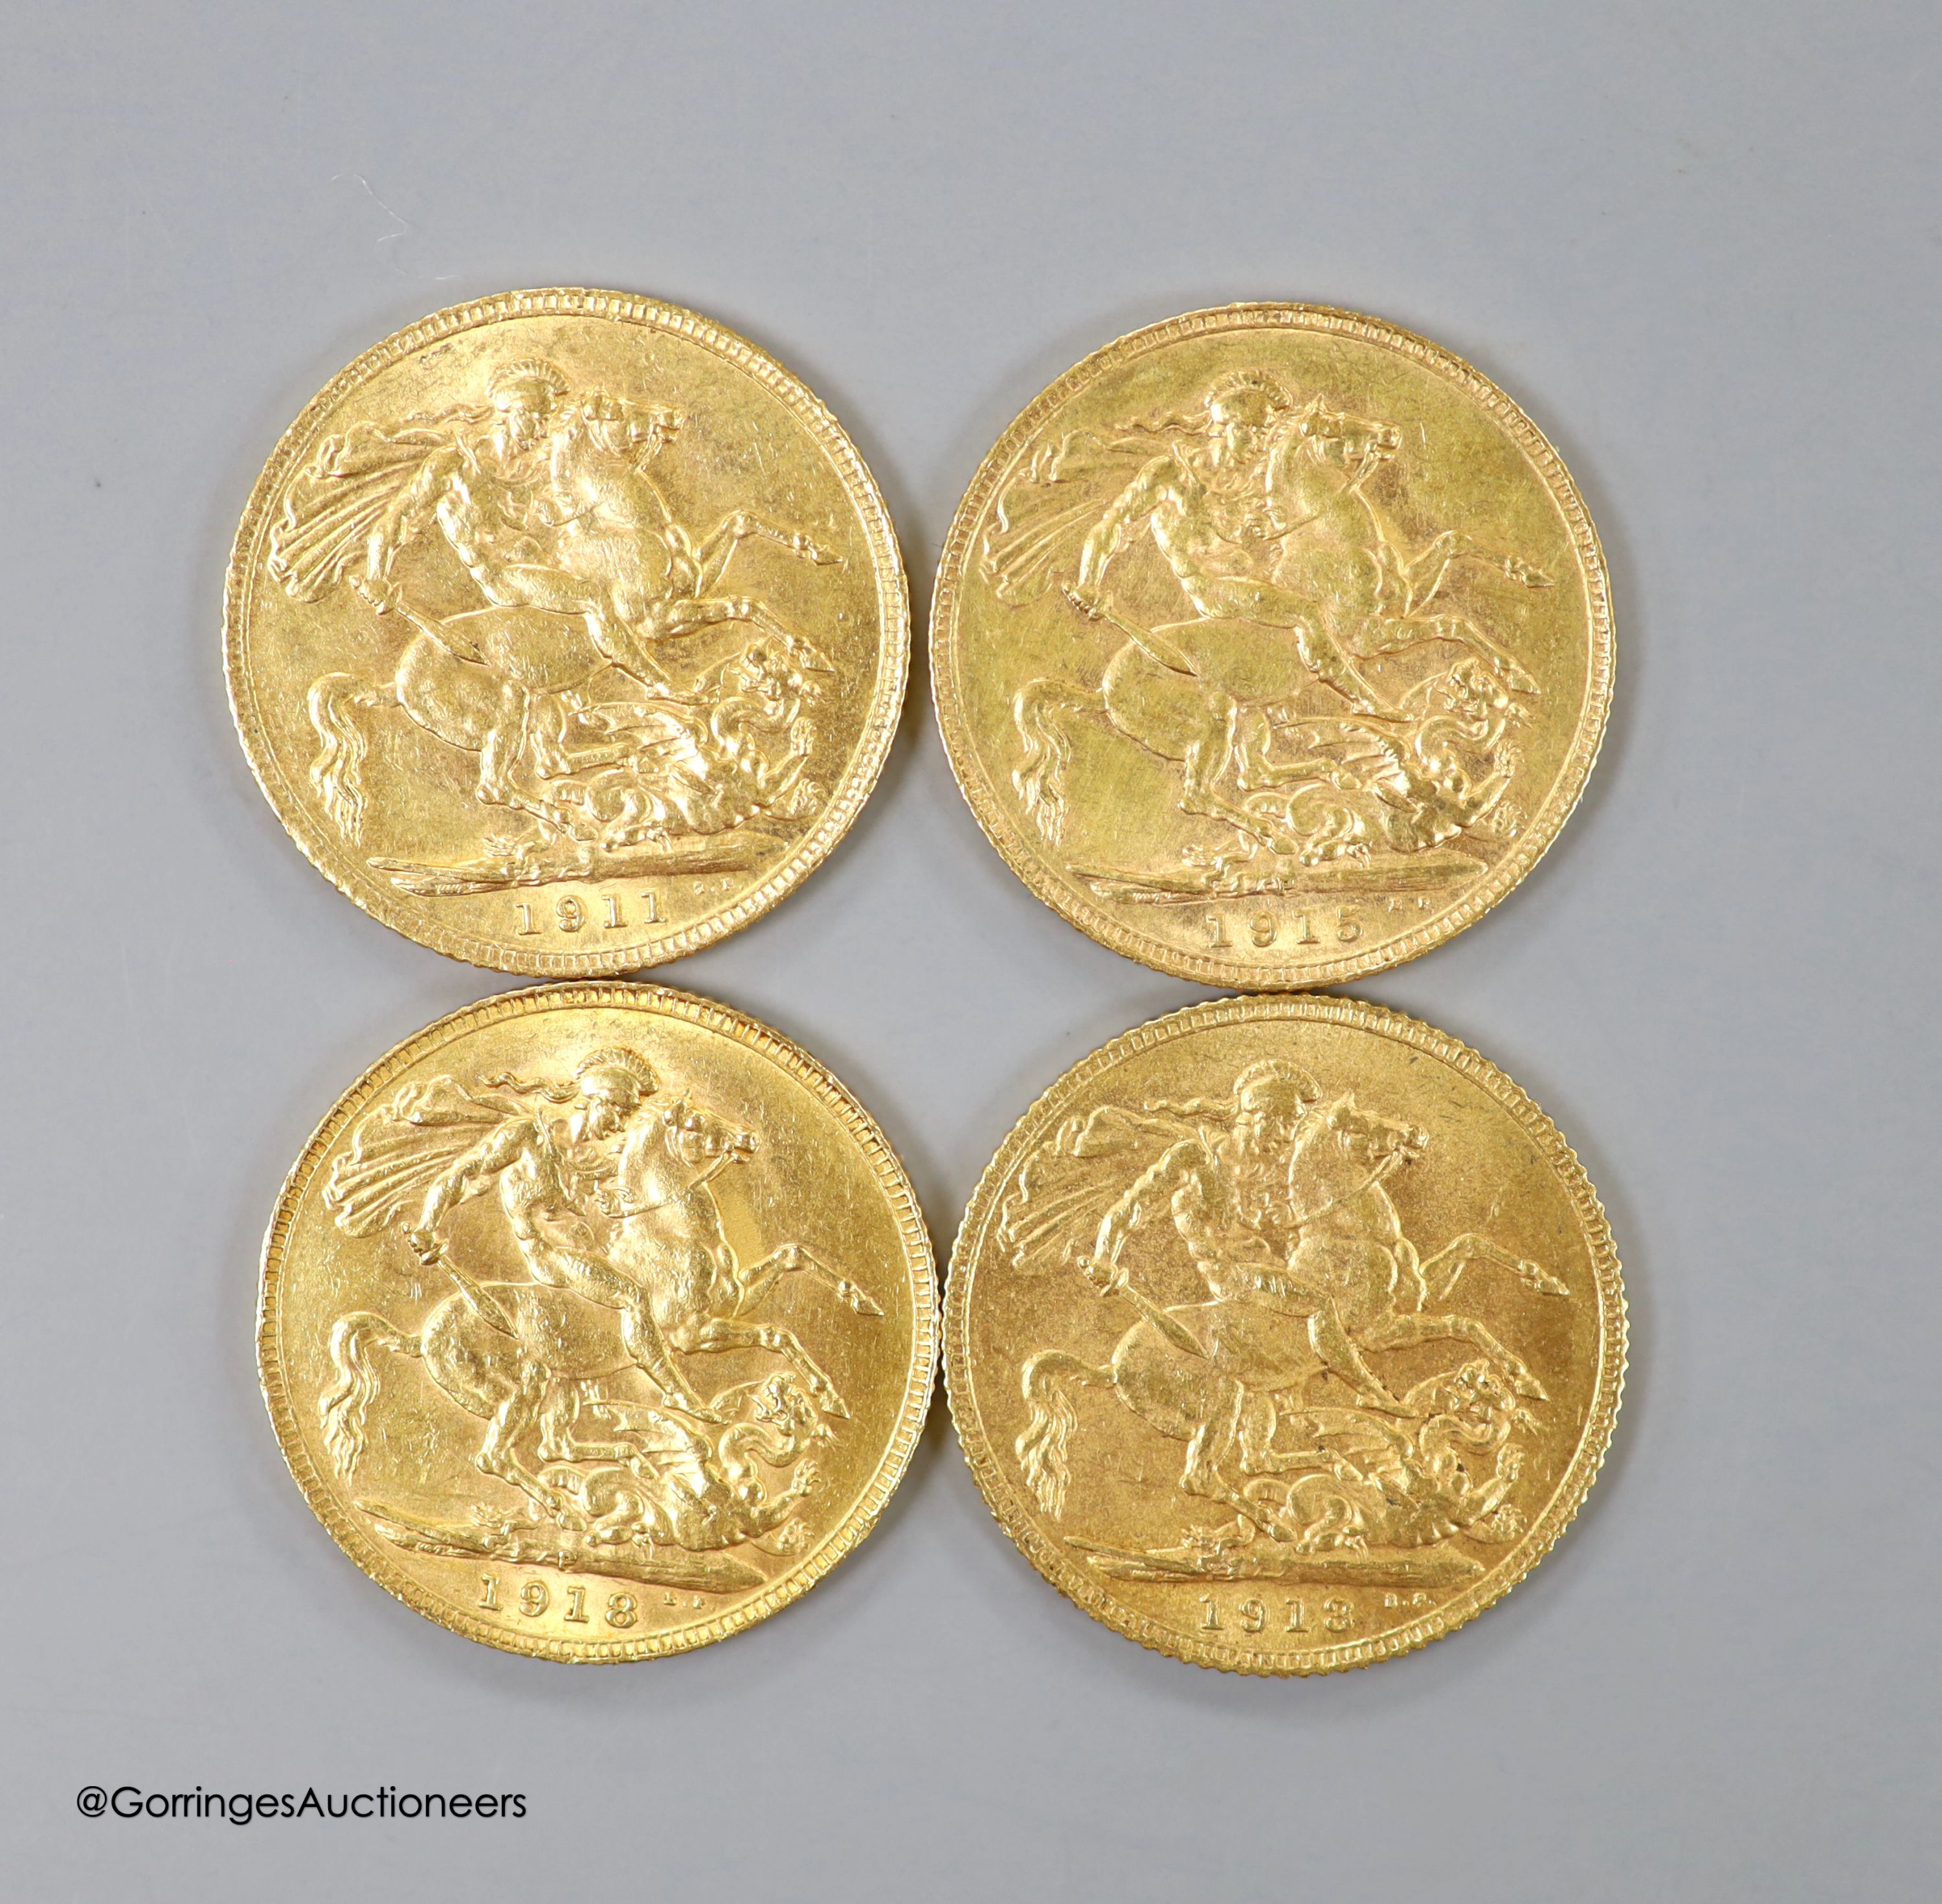 Four George V gold sovereigns, 1911, 1913, 1915P and 1918P